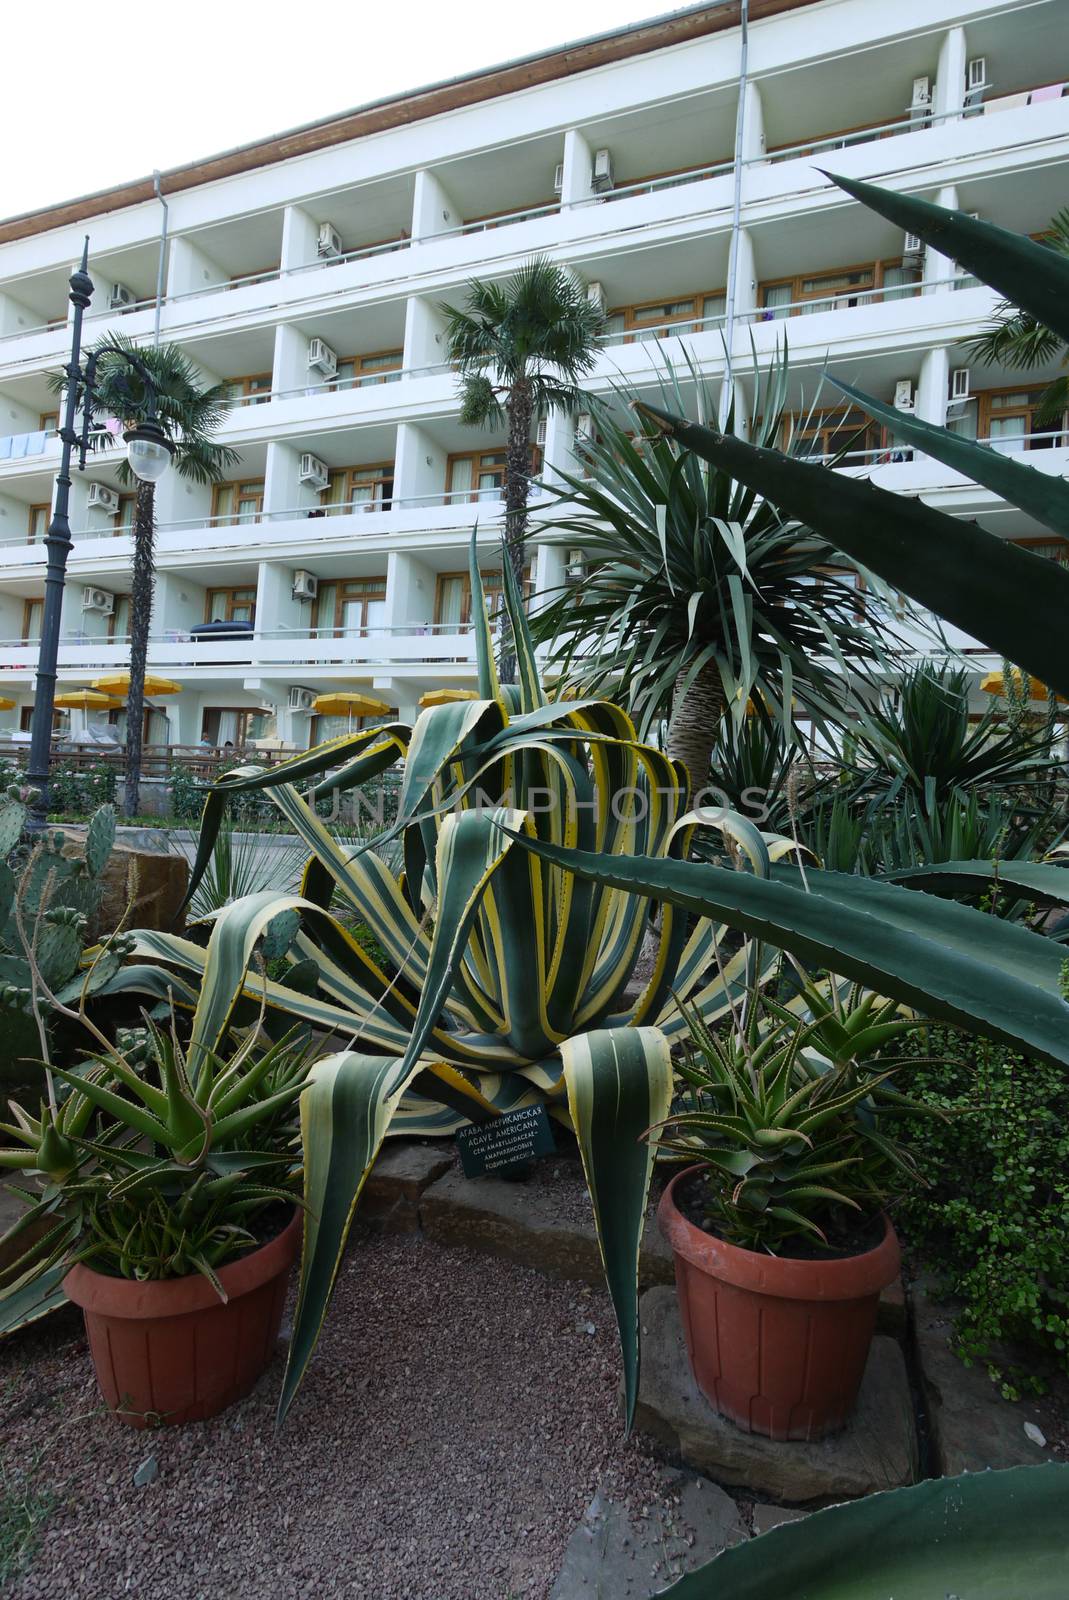 agave, aloe, cacti and palm trees in the foreground of the hotel by Adamchuk